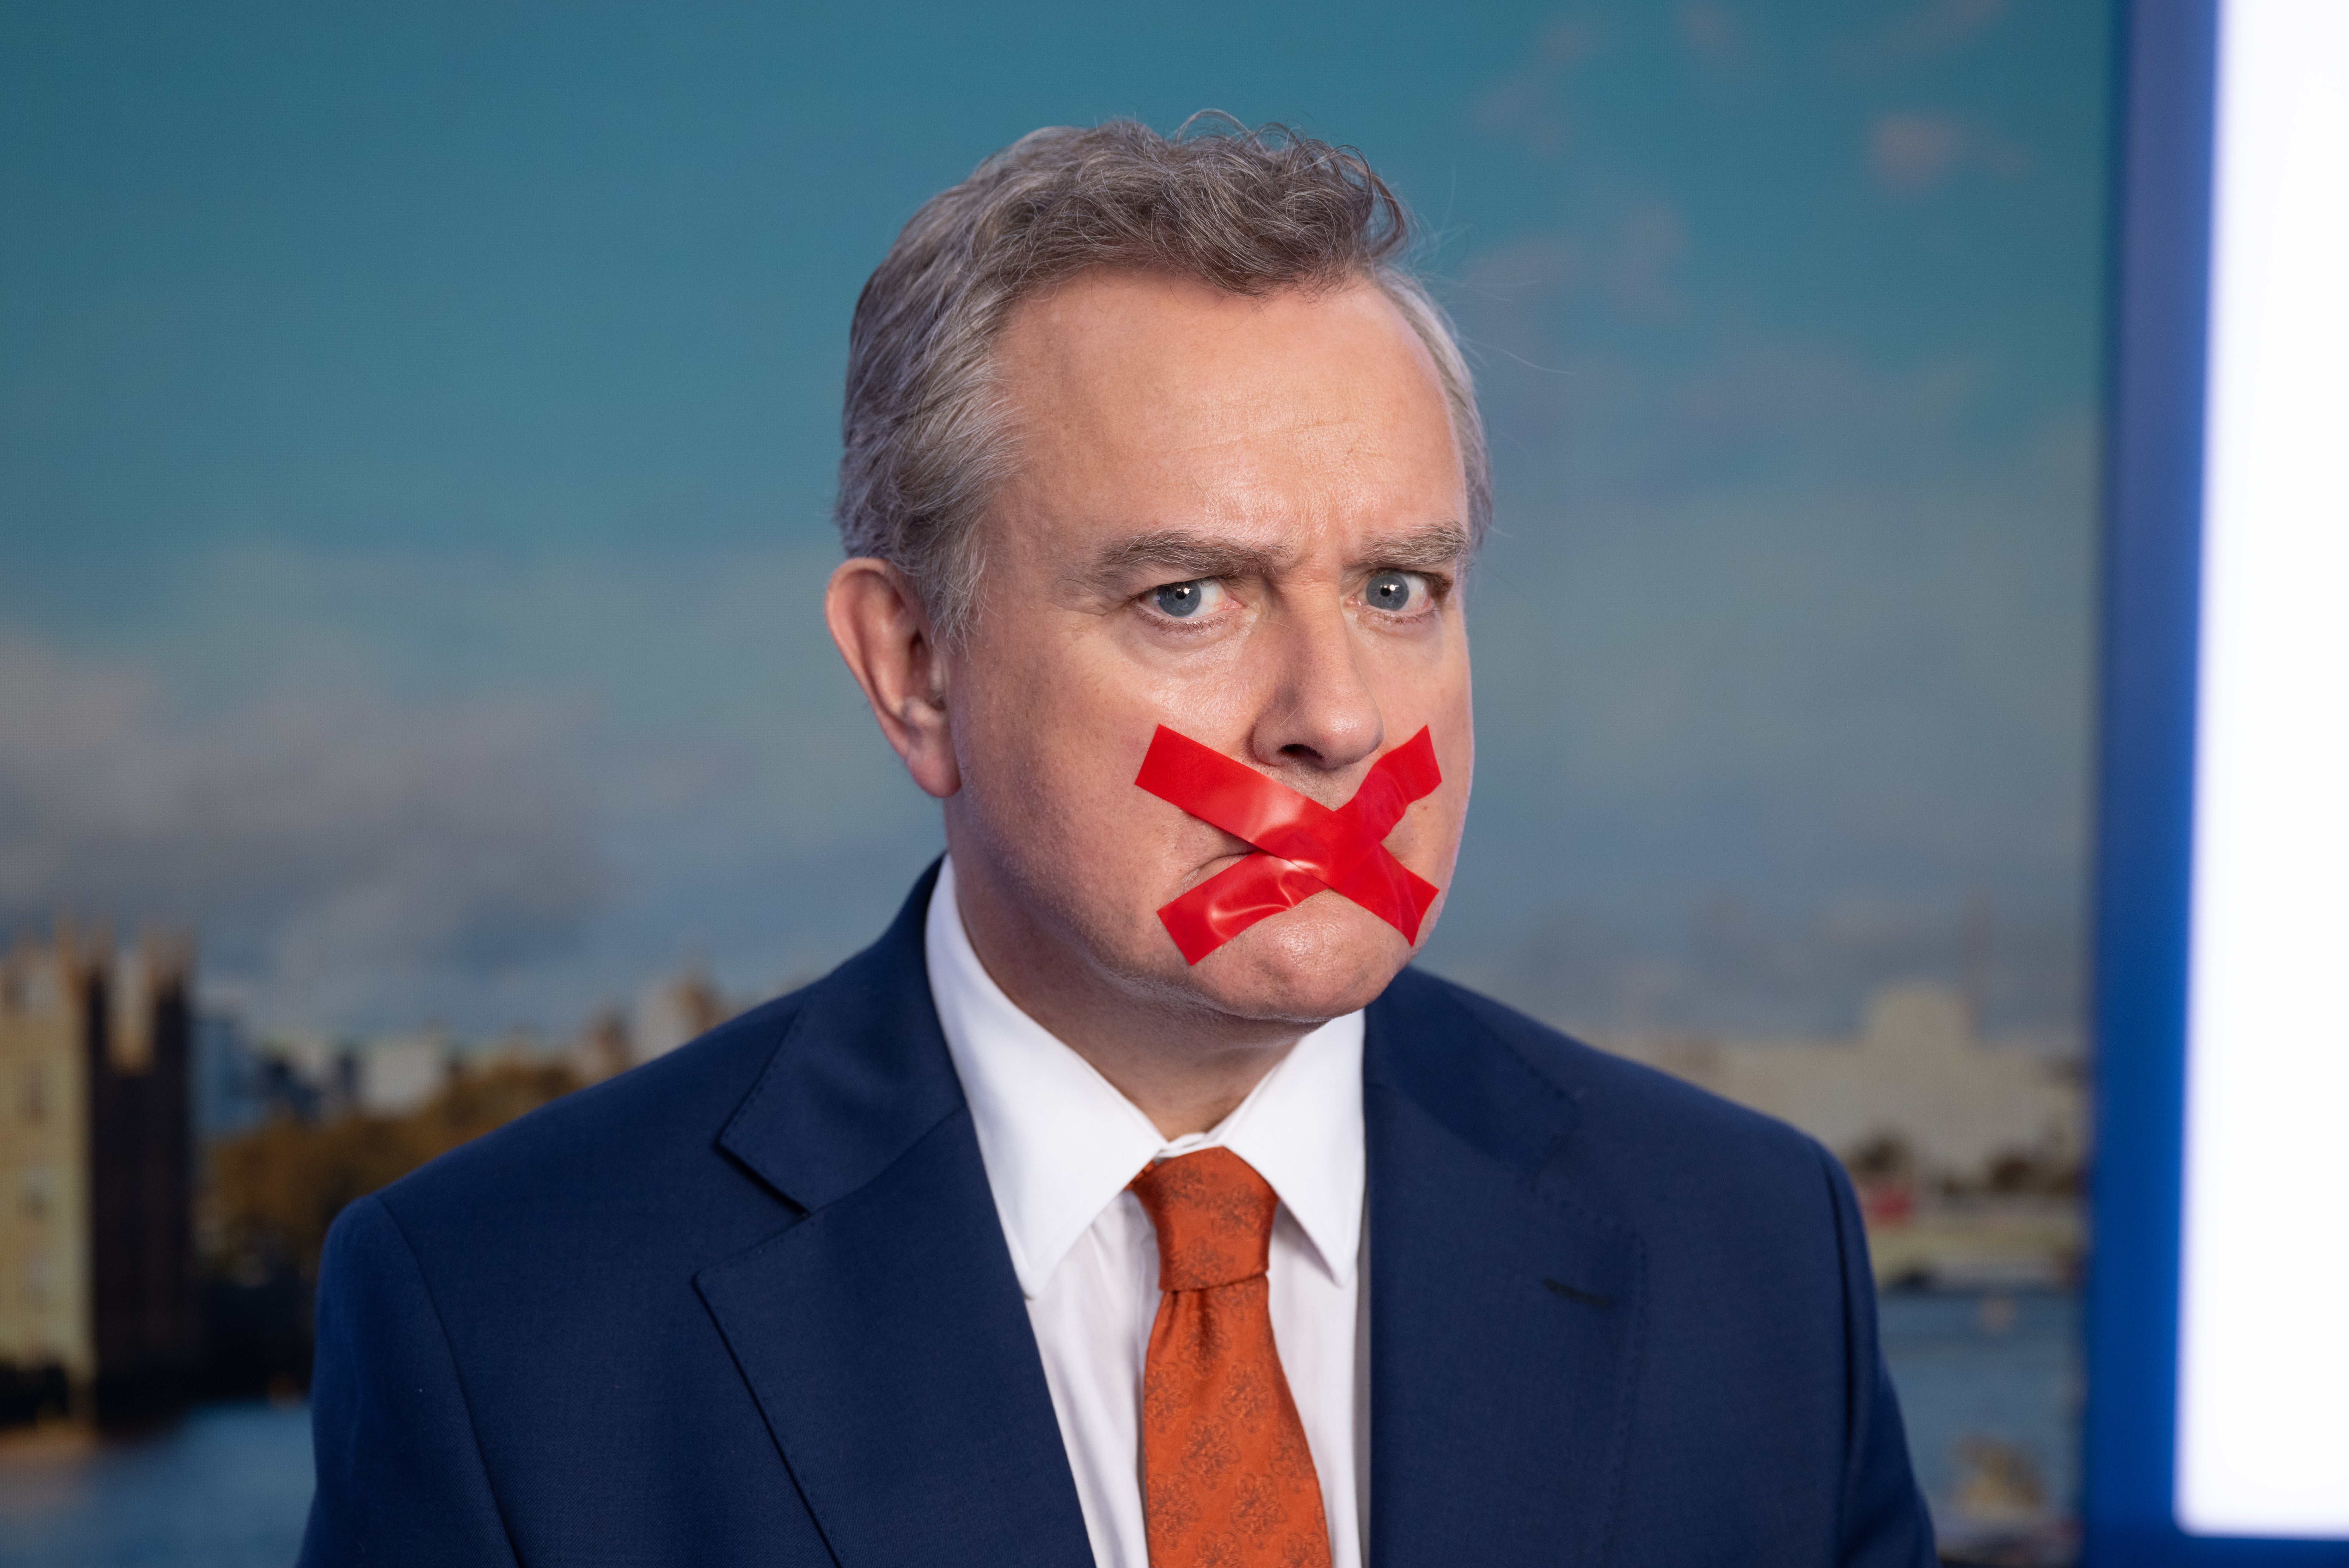 Hugh Bonneville stars as a news anchor who may or may not have told a sexist joke in ‘Douglas is Cancelled’